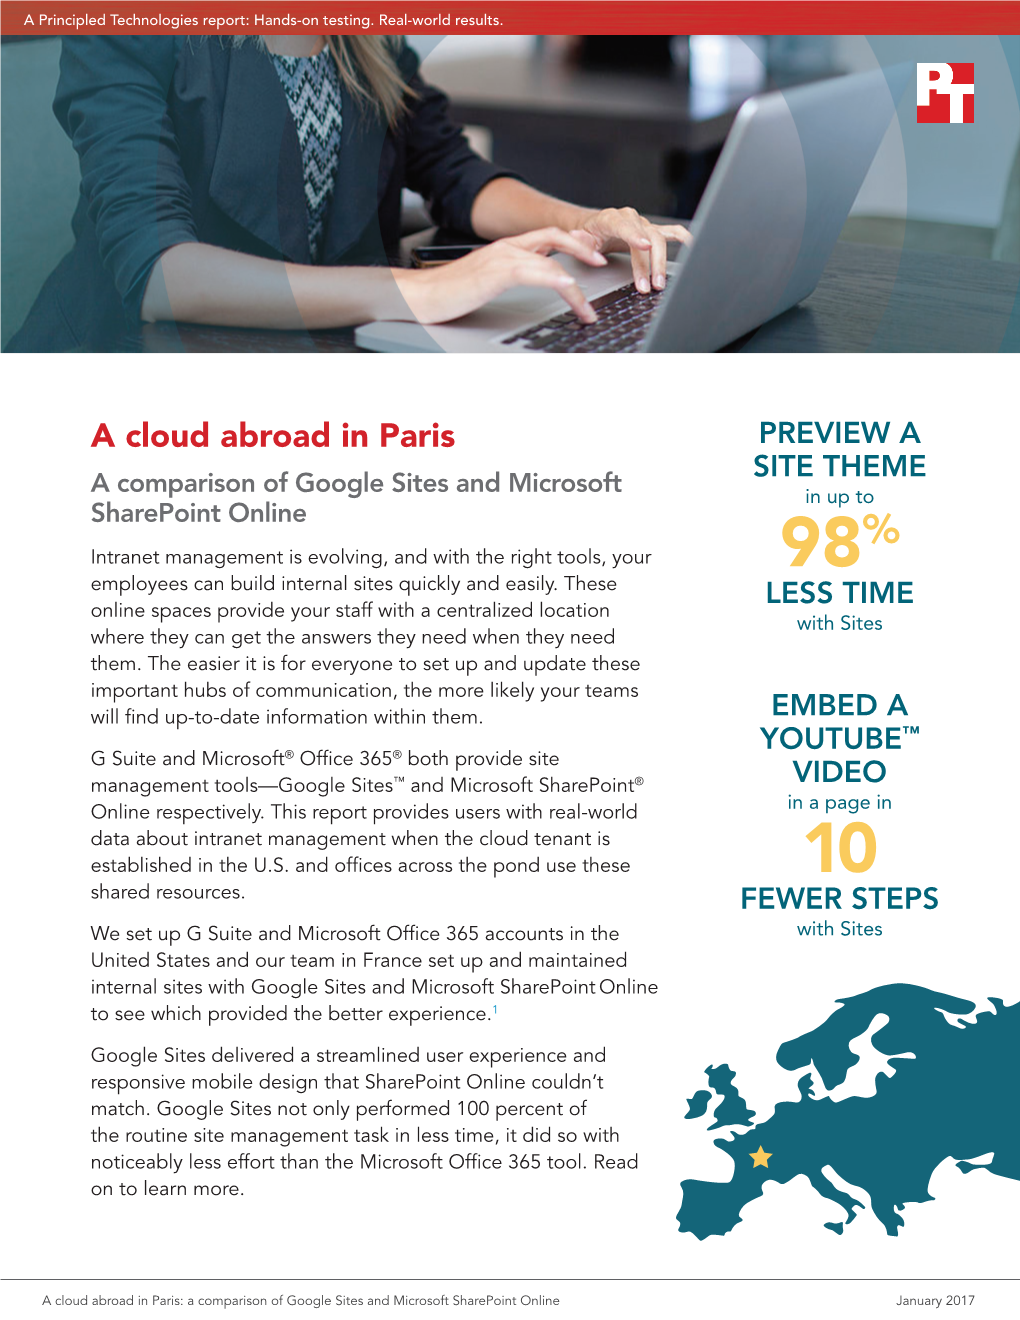 A Cloud Abroad in Paris: a Comparison of Google Sites and Microsoft